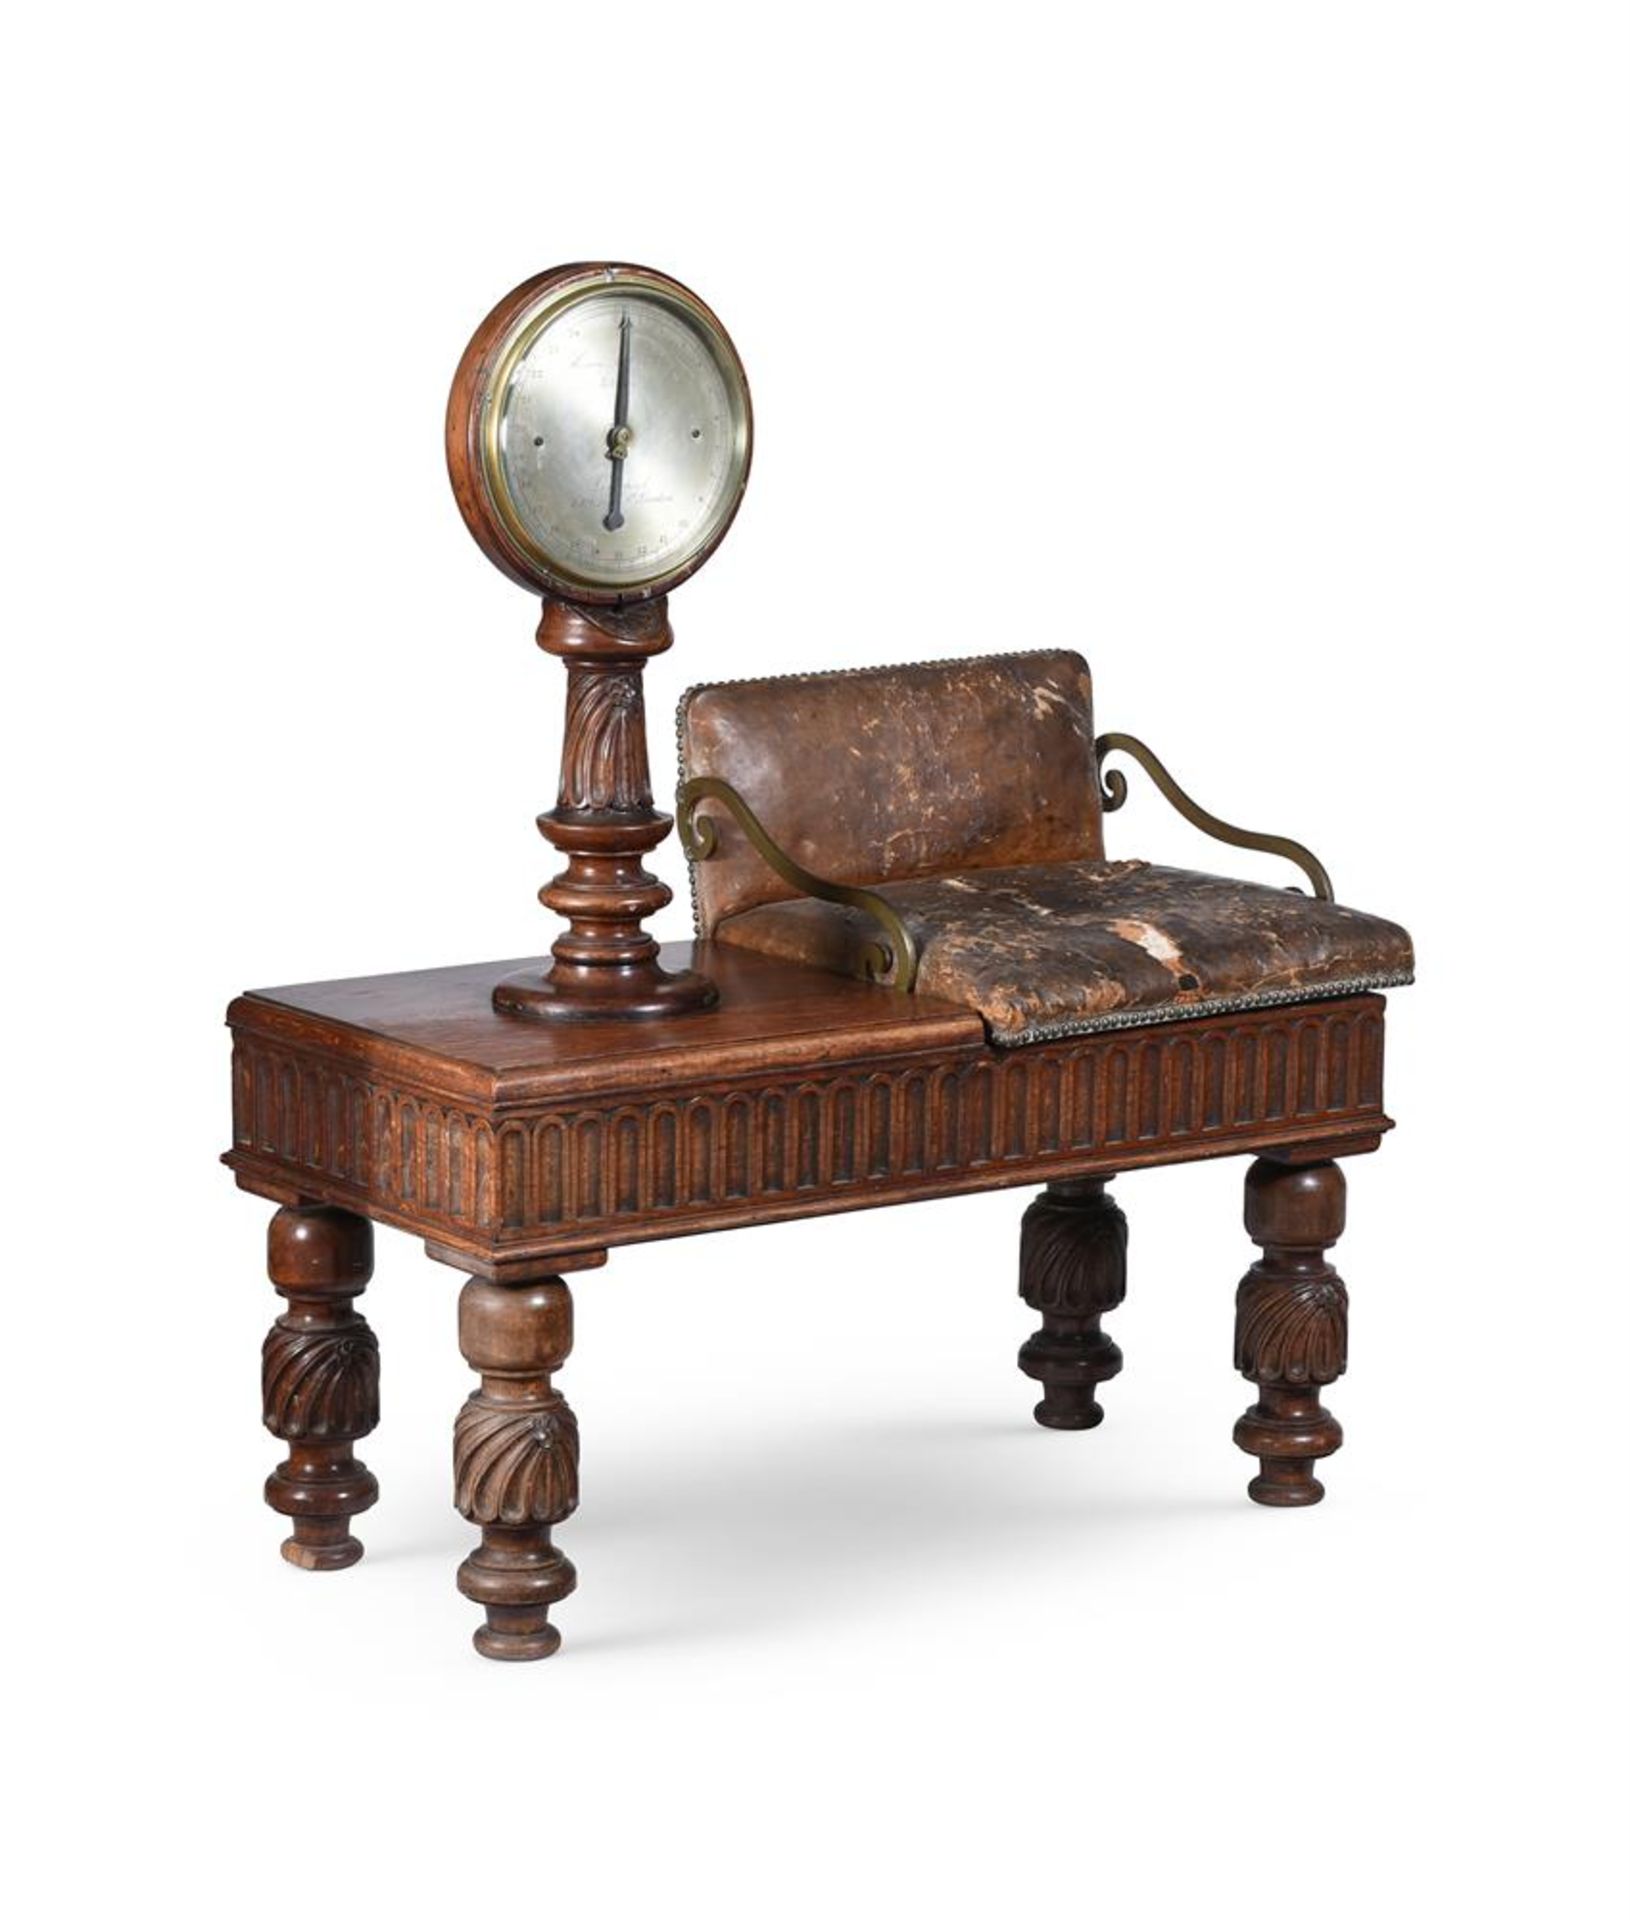 A SET OF LATE VICTORIAN OAK AND BRASS JOCKEY SCALES, BY HENRY POOLEY & SONS, LATE 19TH CENTURY